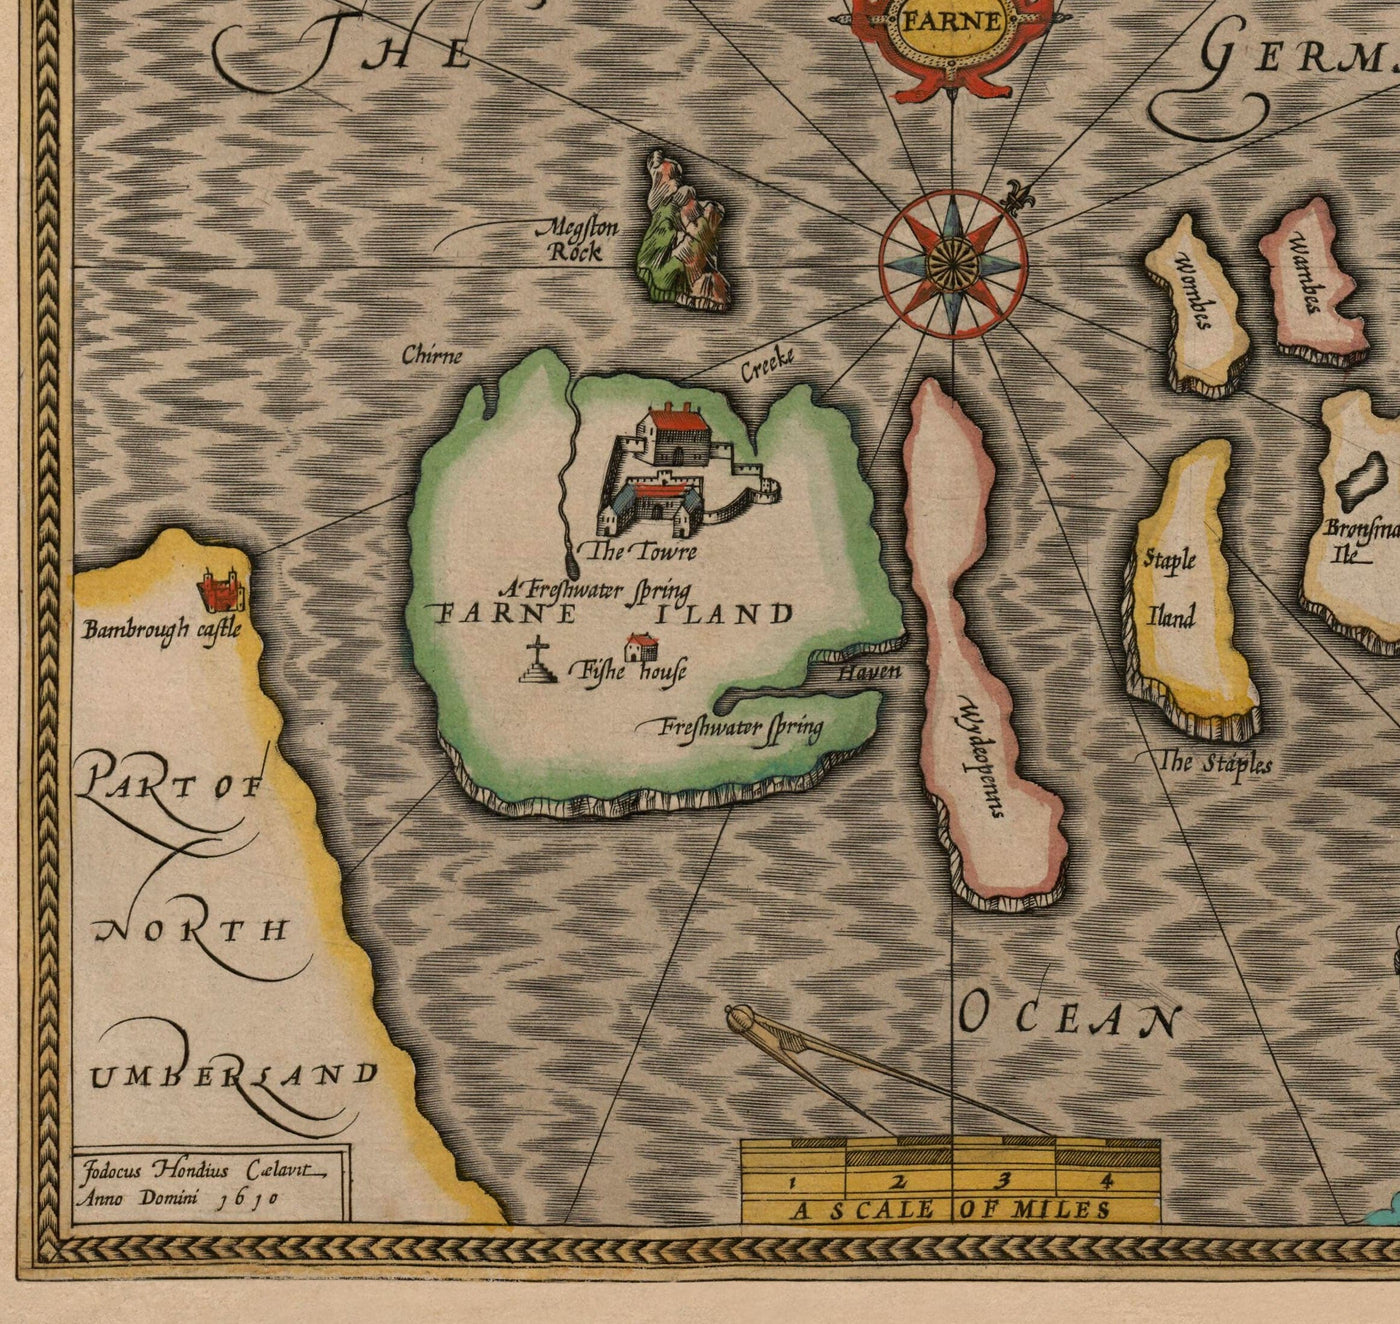 Old Map of Channel Isles, 1611 by John Speed - Jersey, Guernsey, Farne Islands, Holy Island